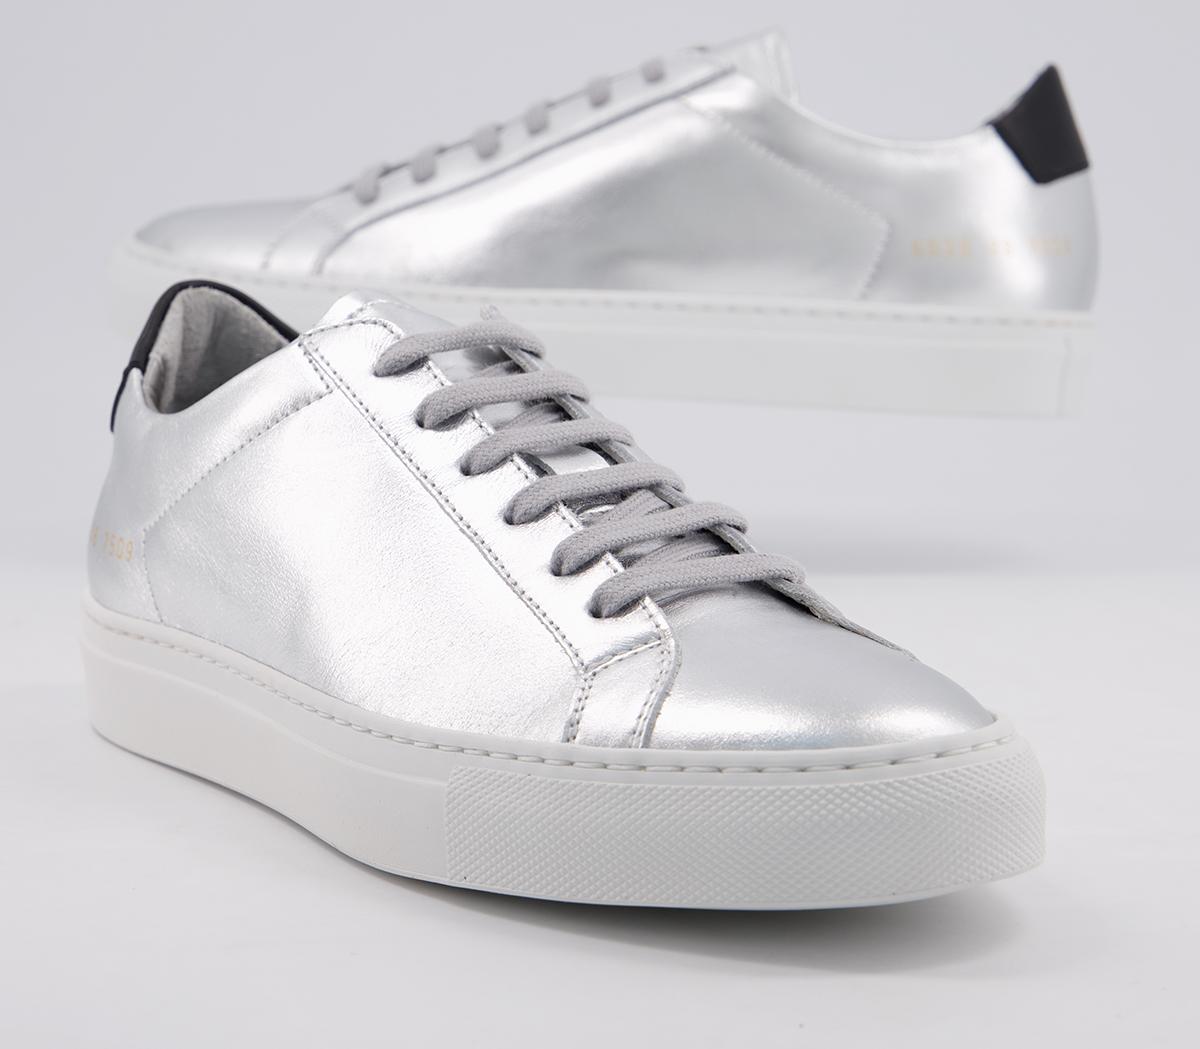 Common Projects Retro Low Article Trainers White Black - Women's Trainers